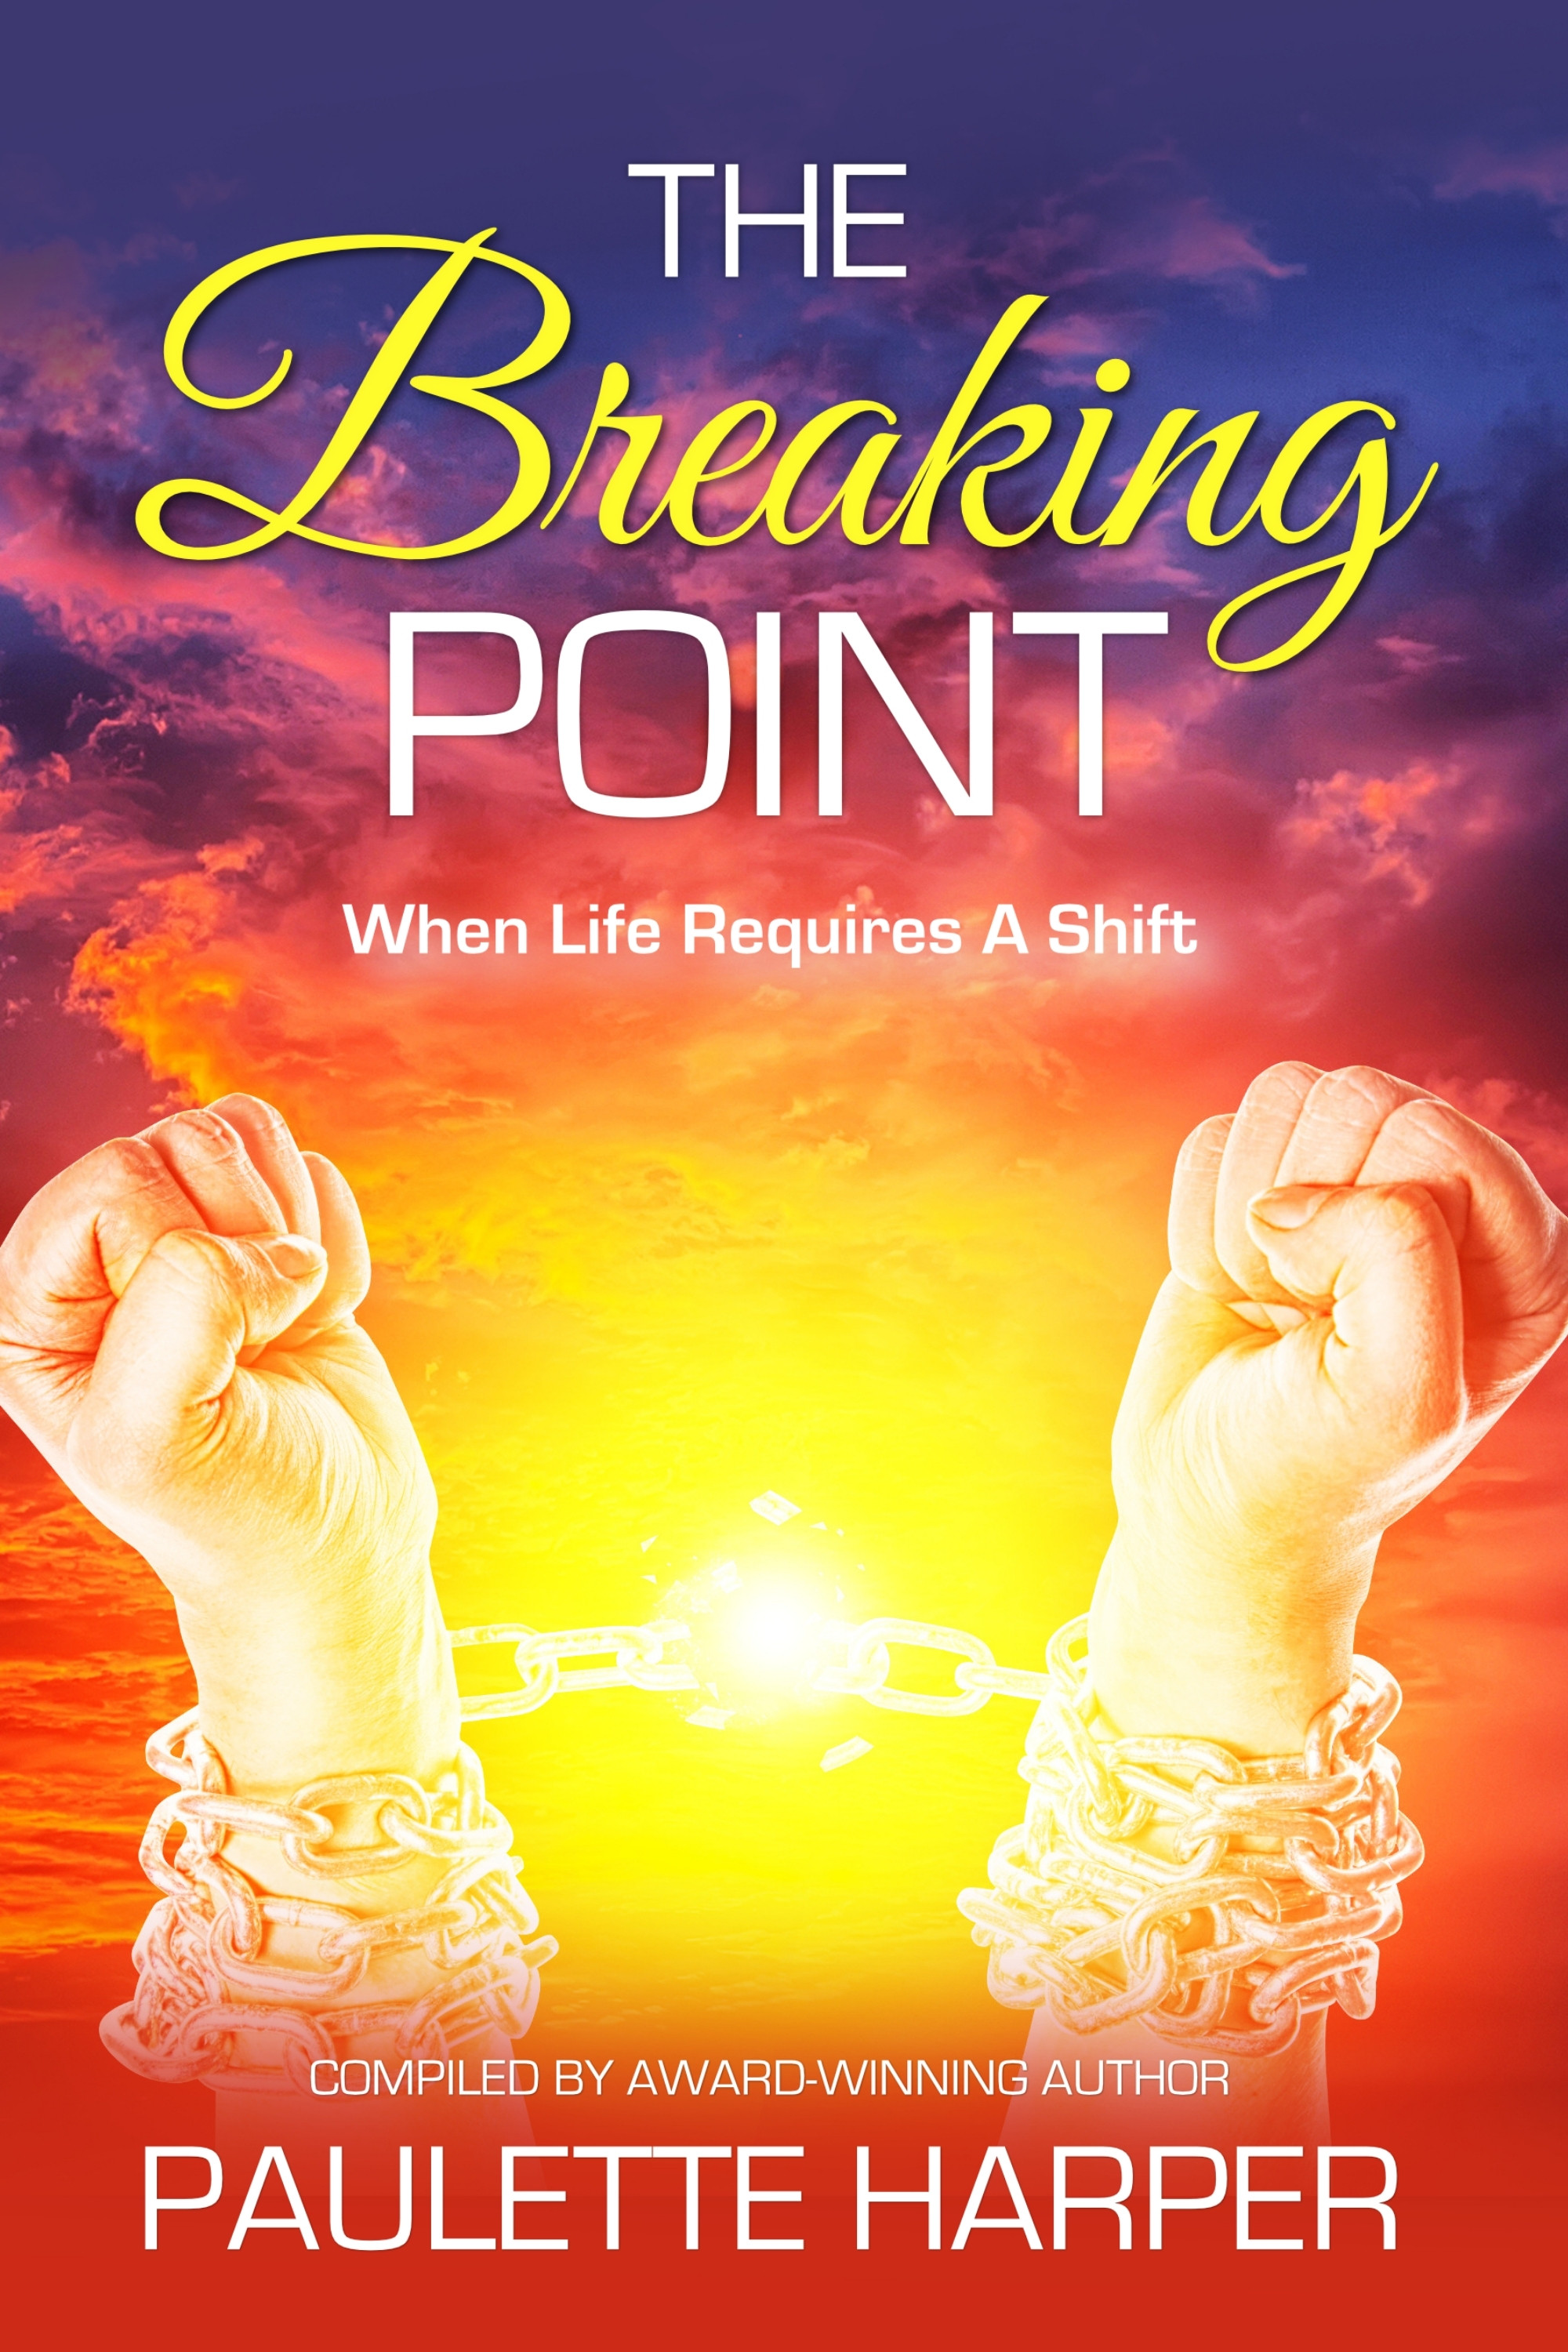 The Breaking Point: Les Brown, Endorses New Book By Award-Winning Author, Paulette Harper